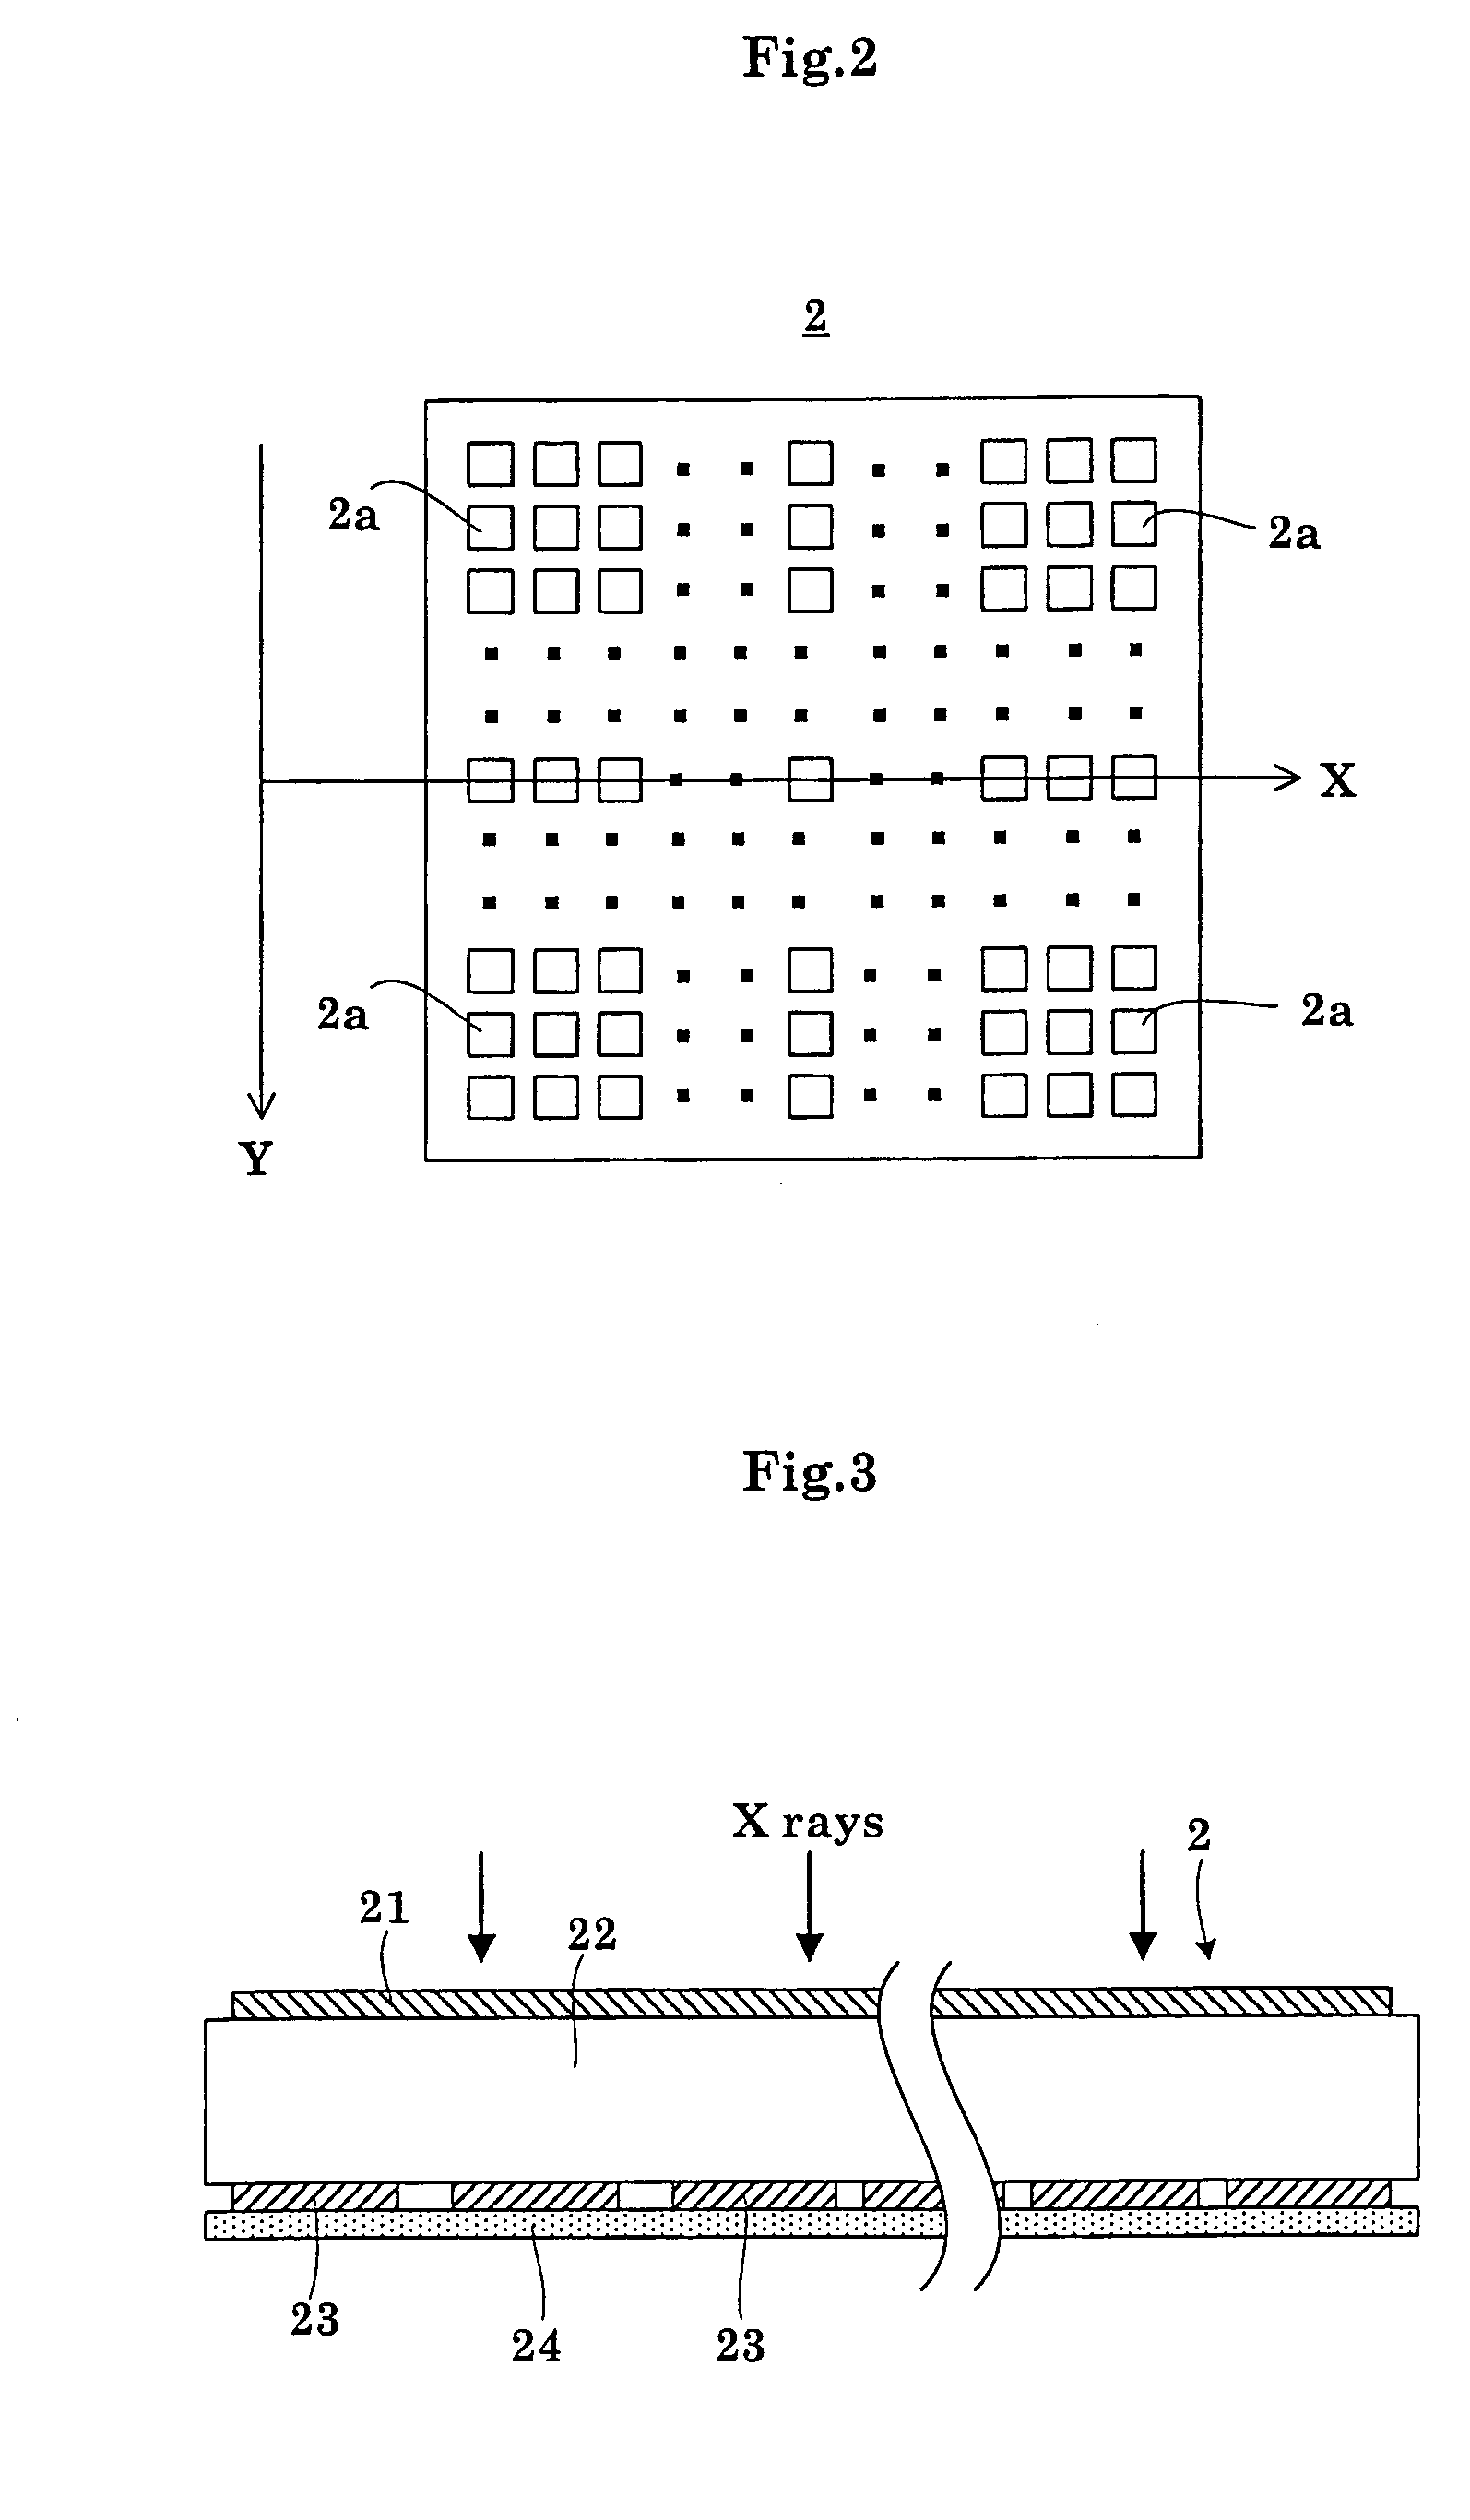 Radiographic apparatus and radiation detection signal processing method